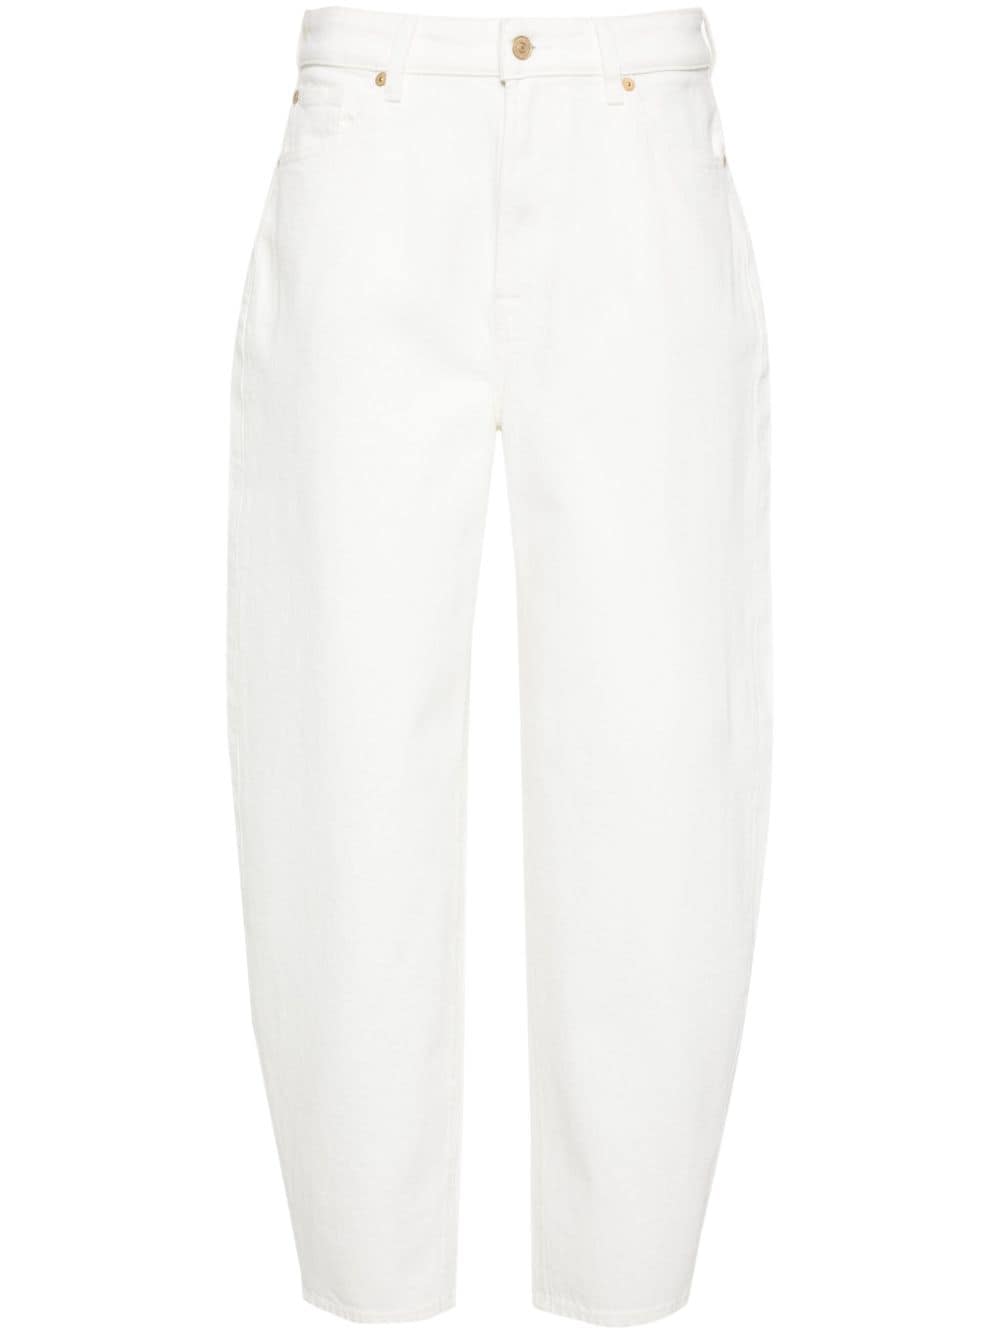 7 For All Mankind Jayne tapered jeans - White von 7 For All Mankind